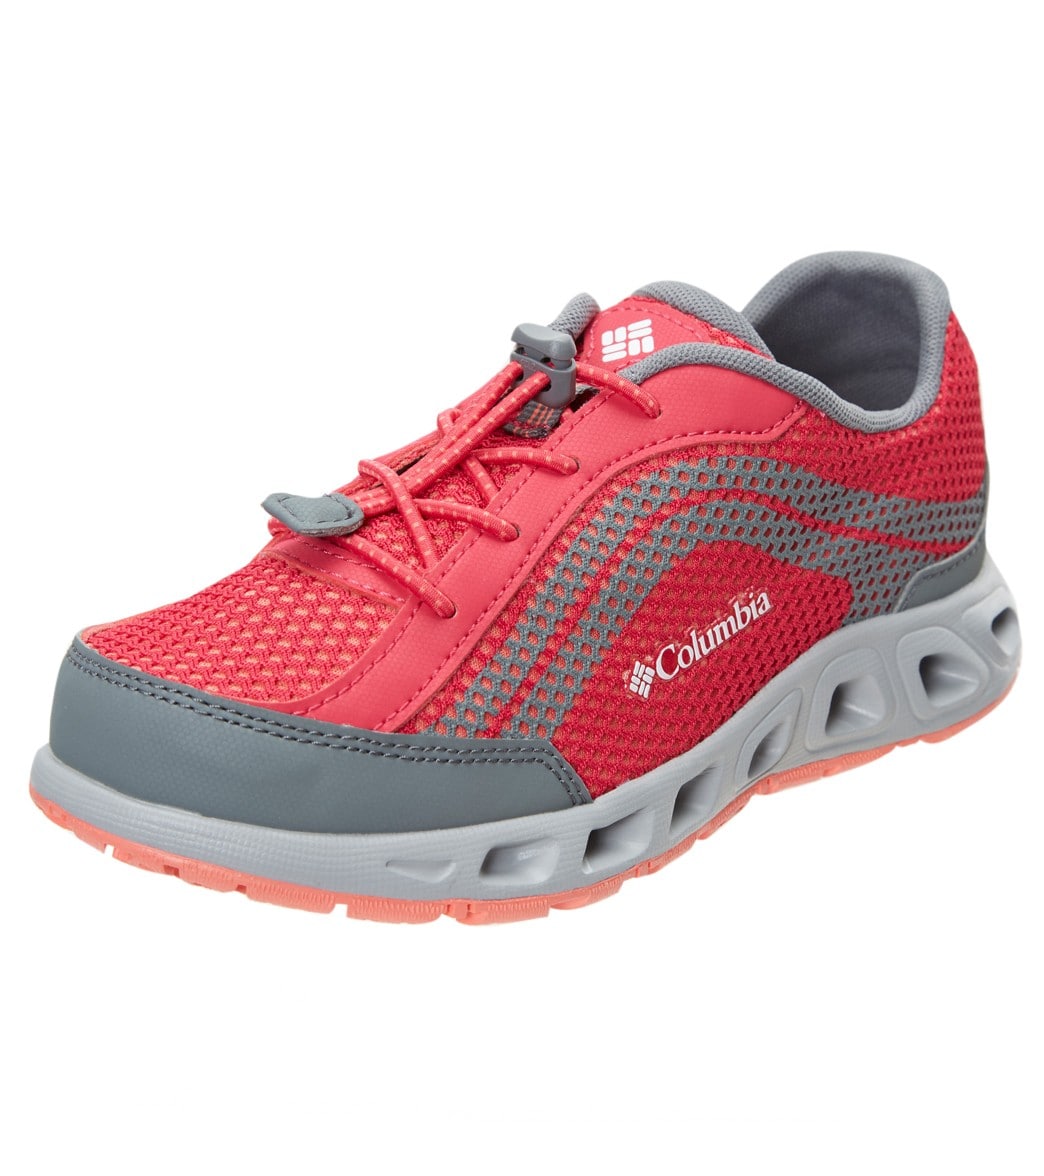 Columbia Youth Drainmaker Iv Water Shoe - Bright Rose Hot Coral 4 Rose - Swimoutlet.com